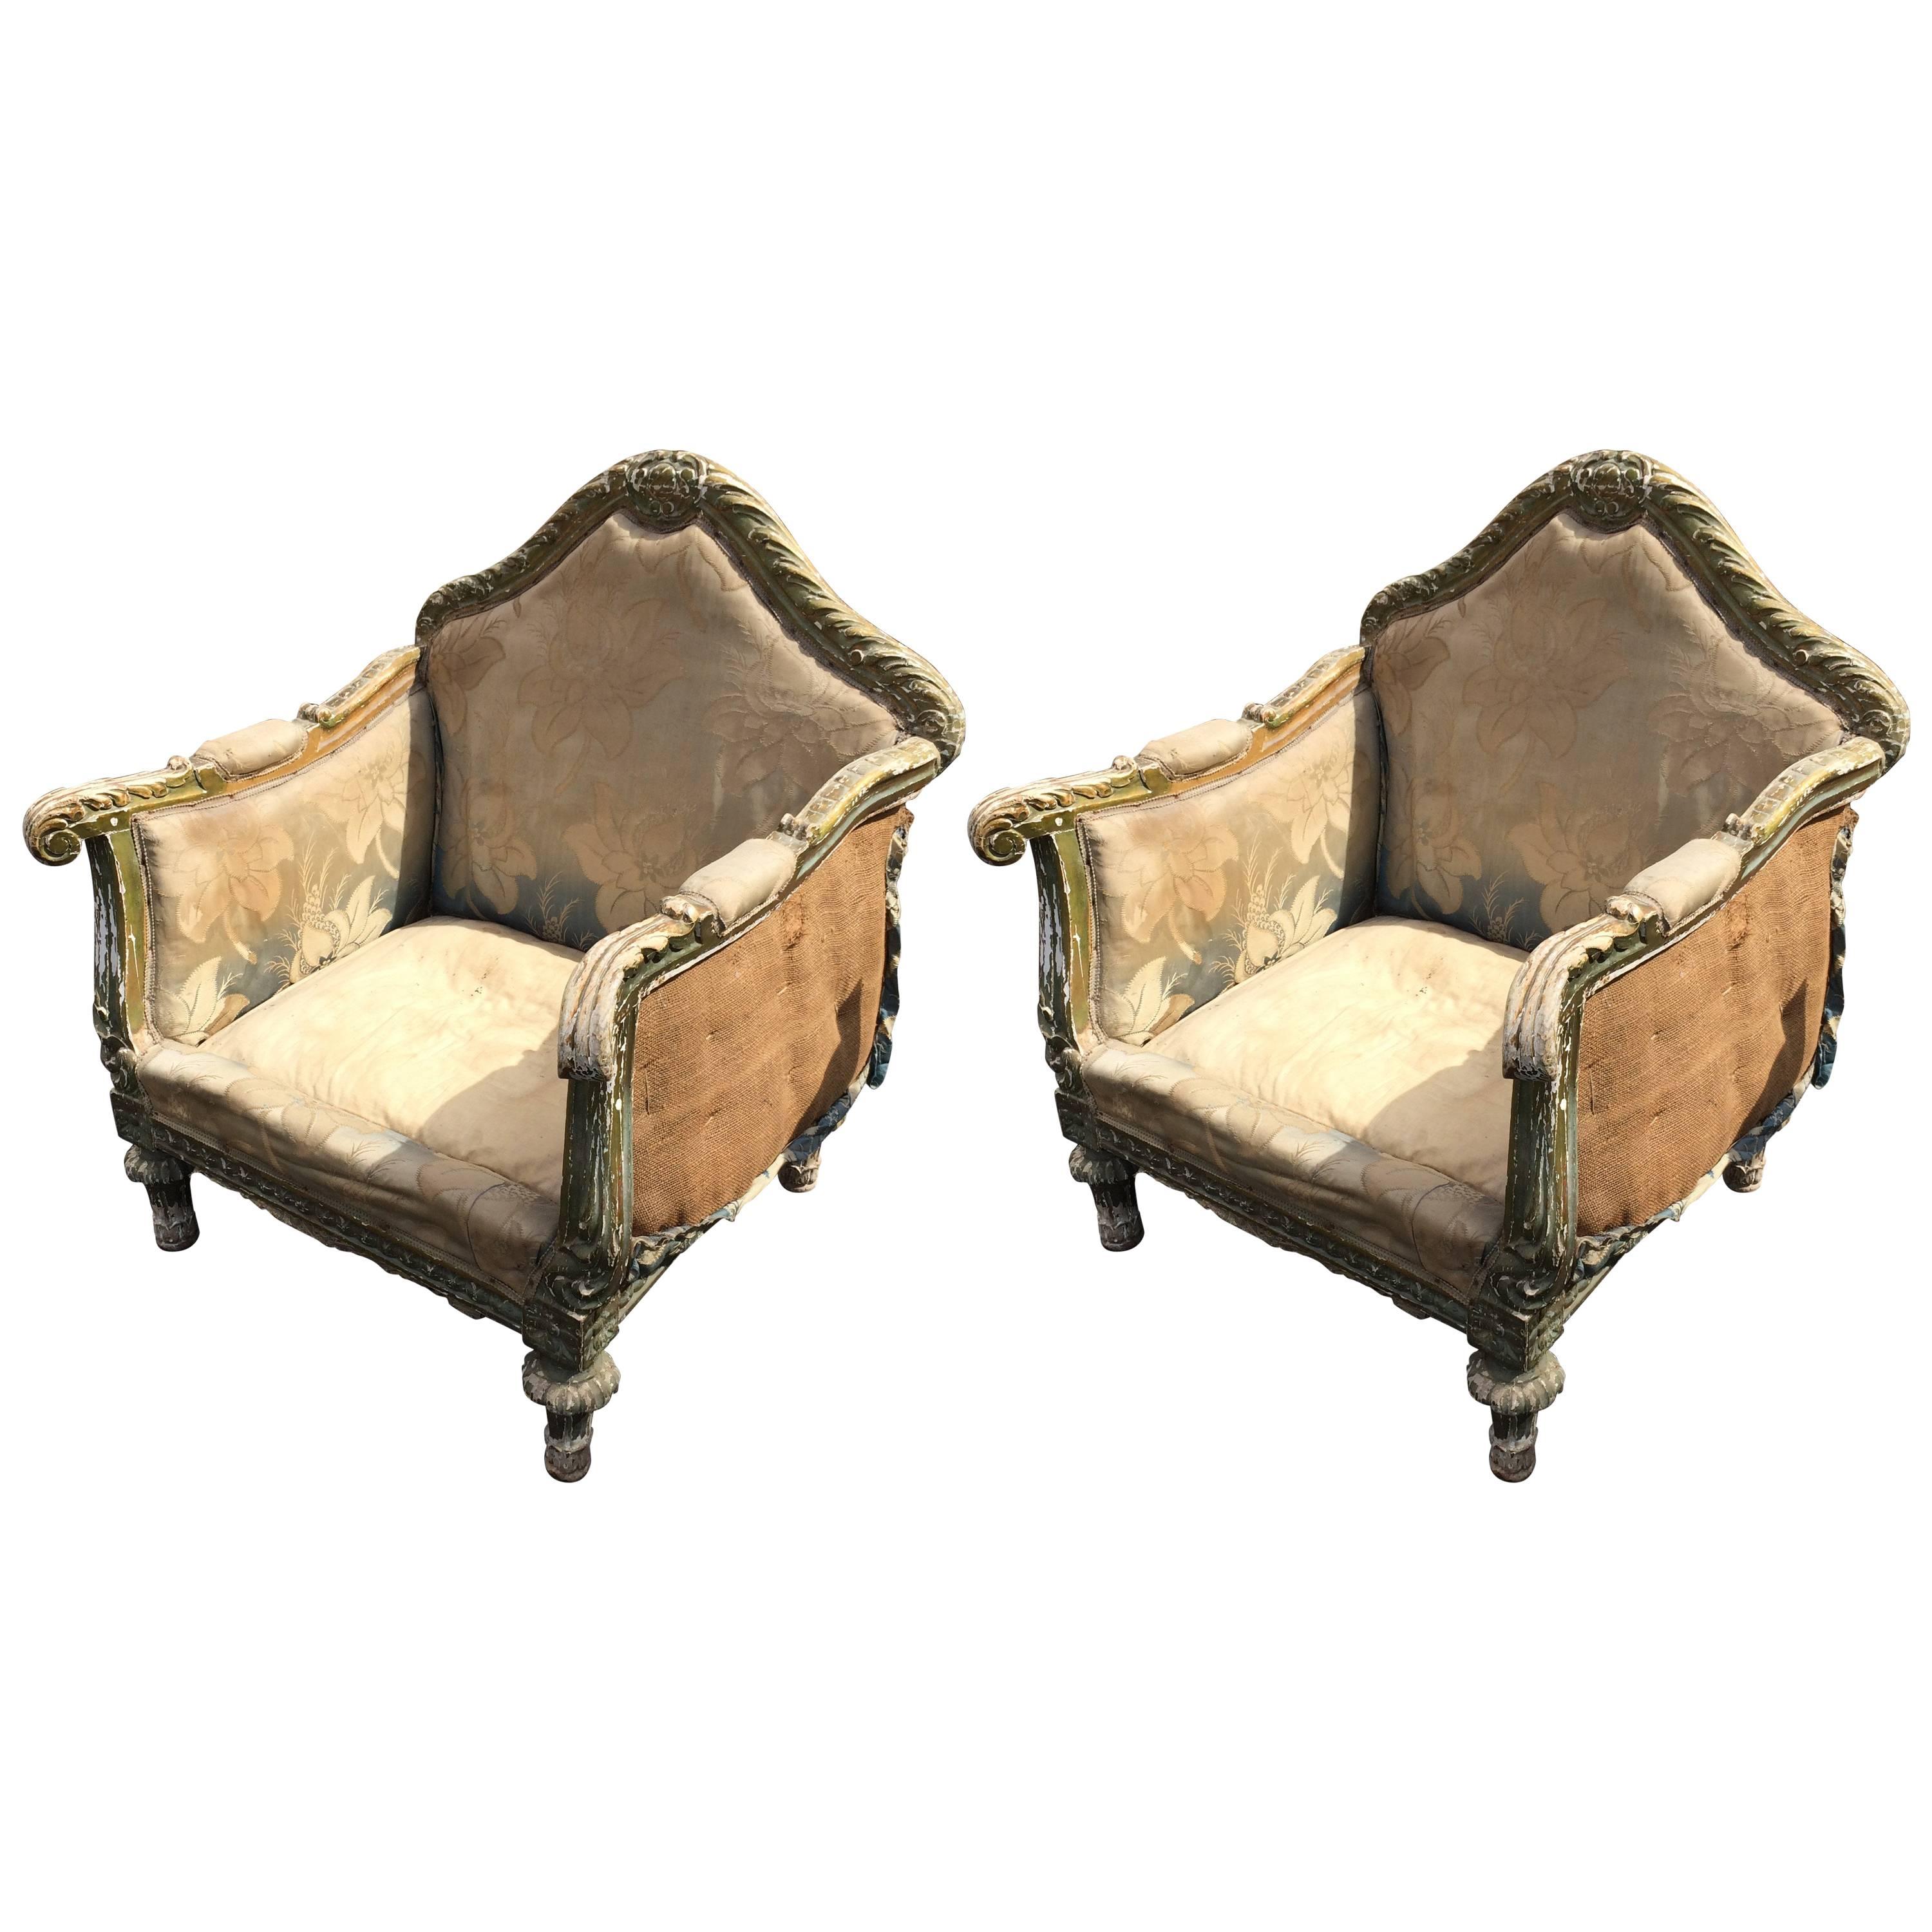 Romantic Pair of Antique Oversized French Club Chairs with Great Bones